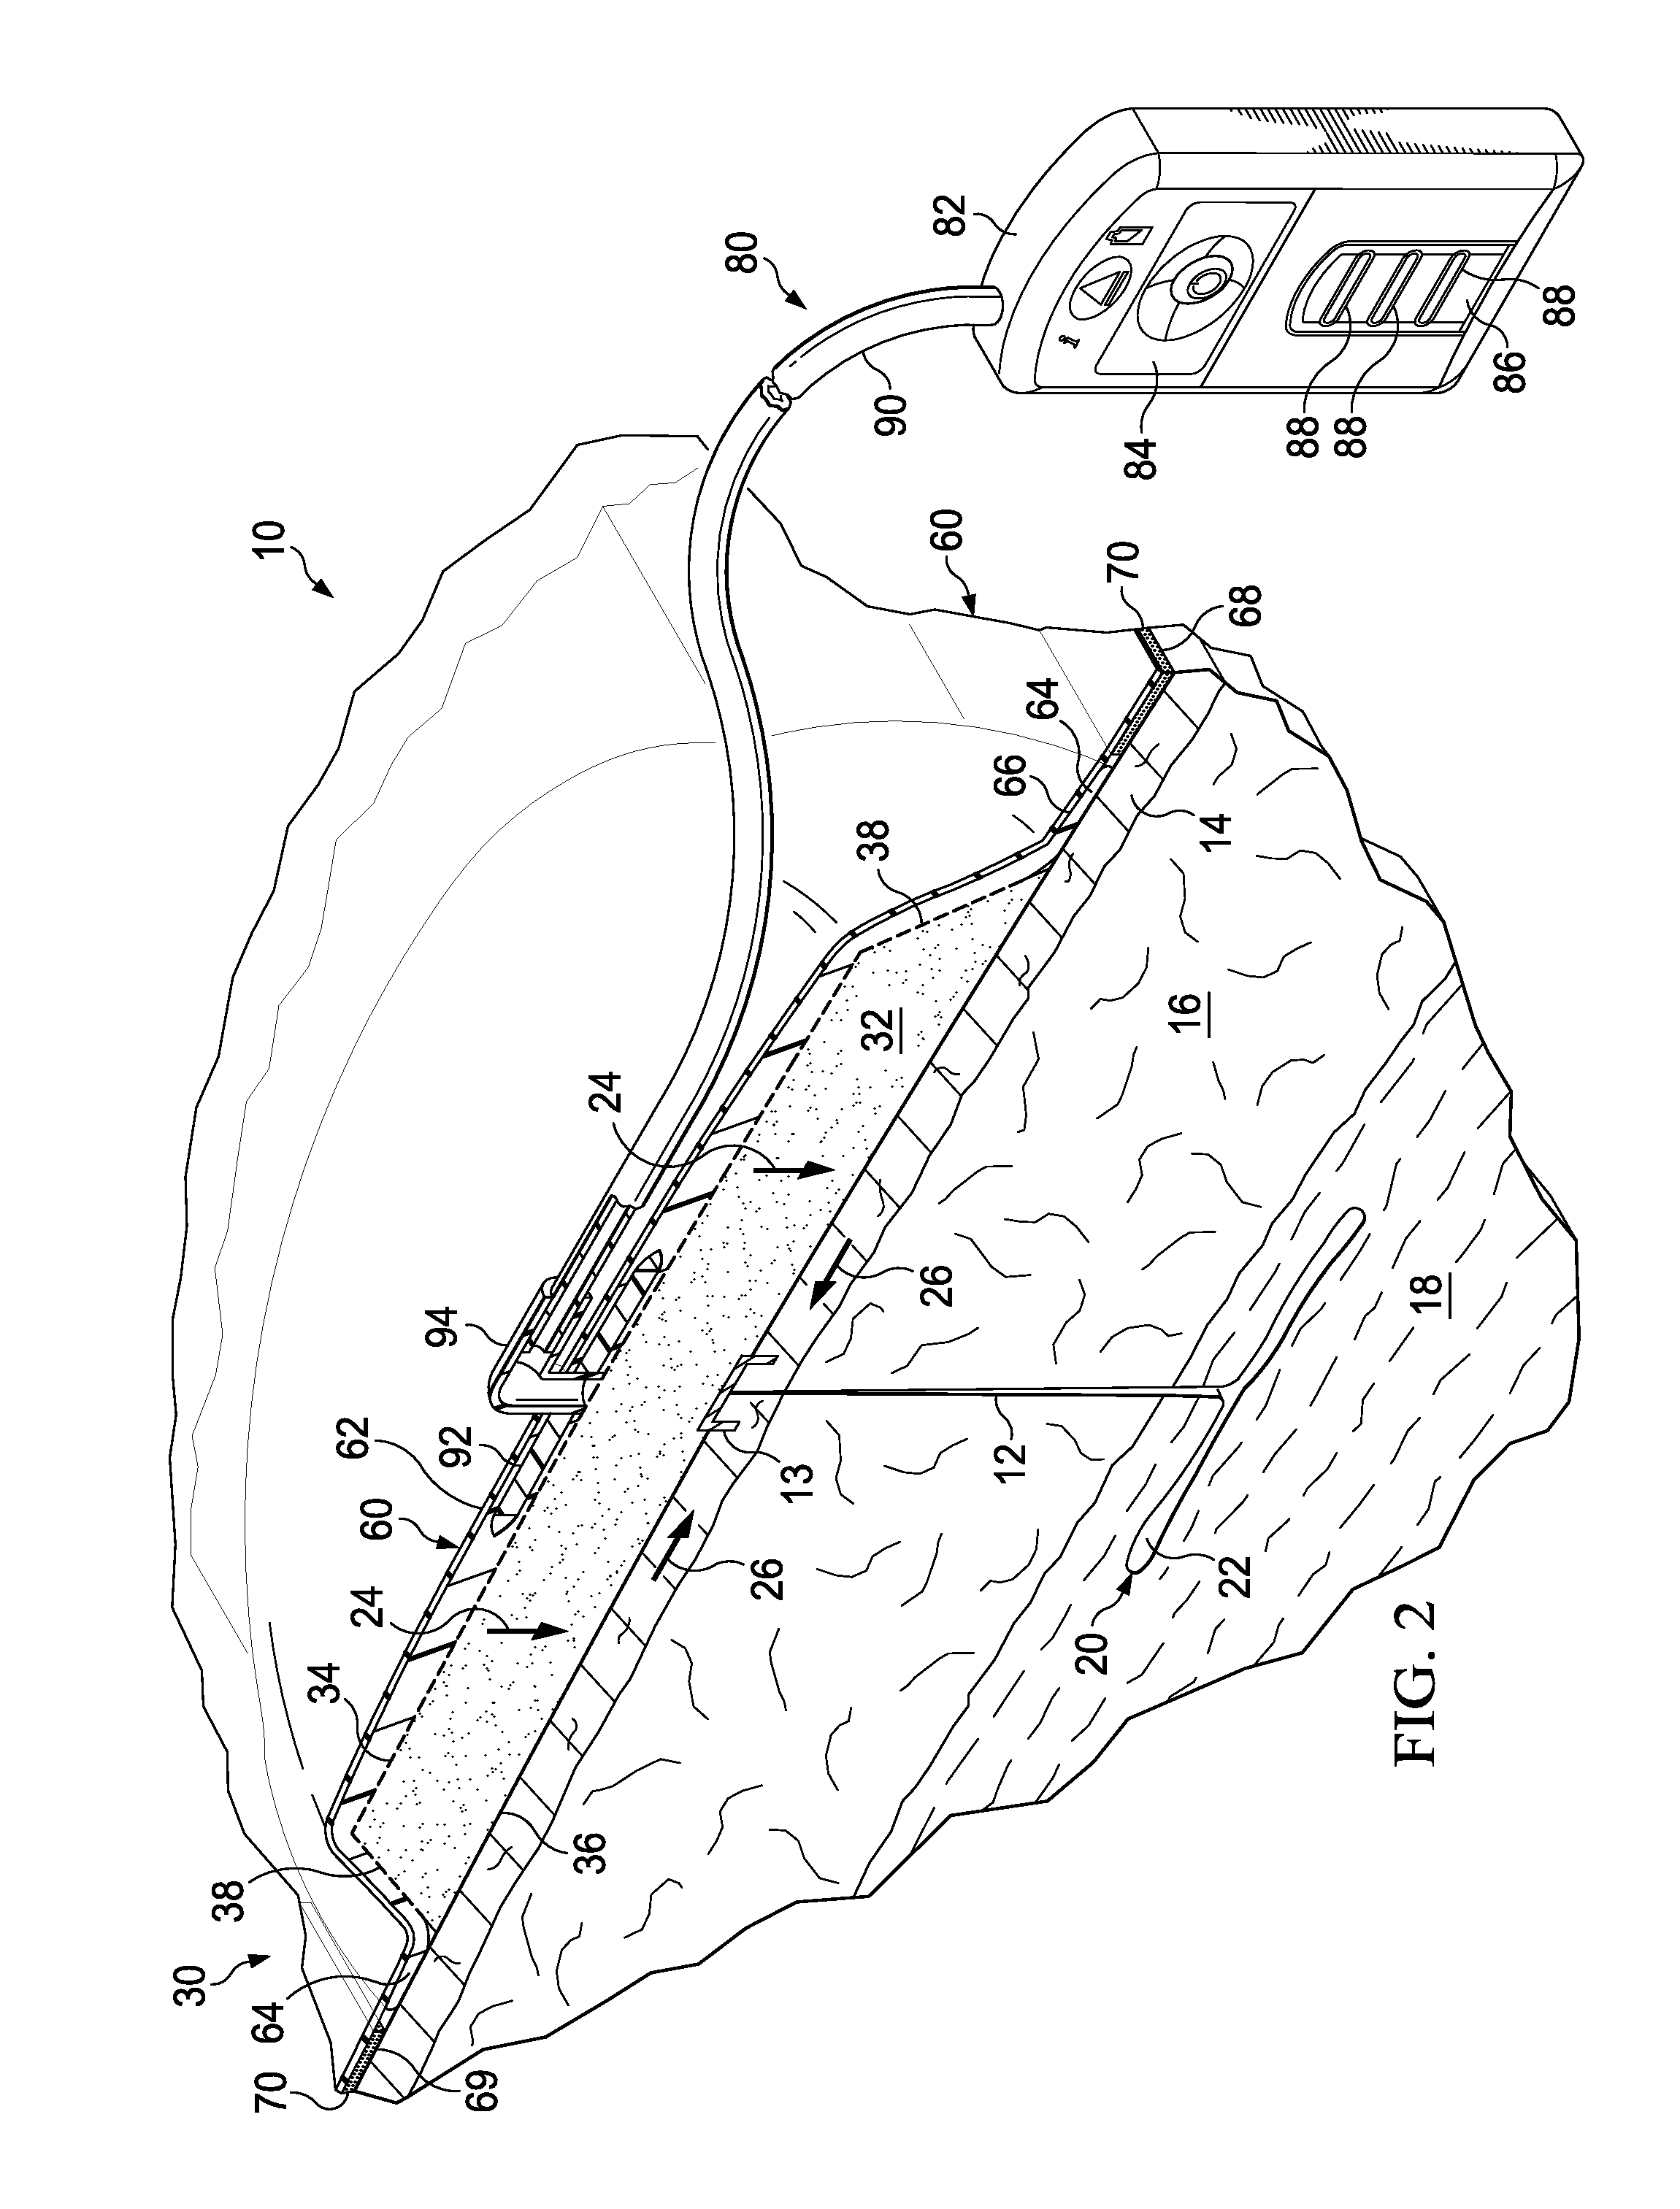 Reduced-pressure, compression systems and apparatuses for use on a curved body part